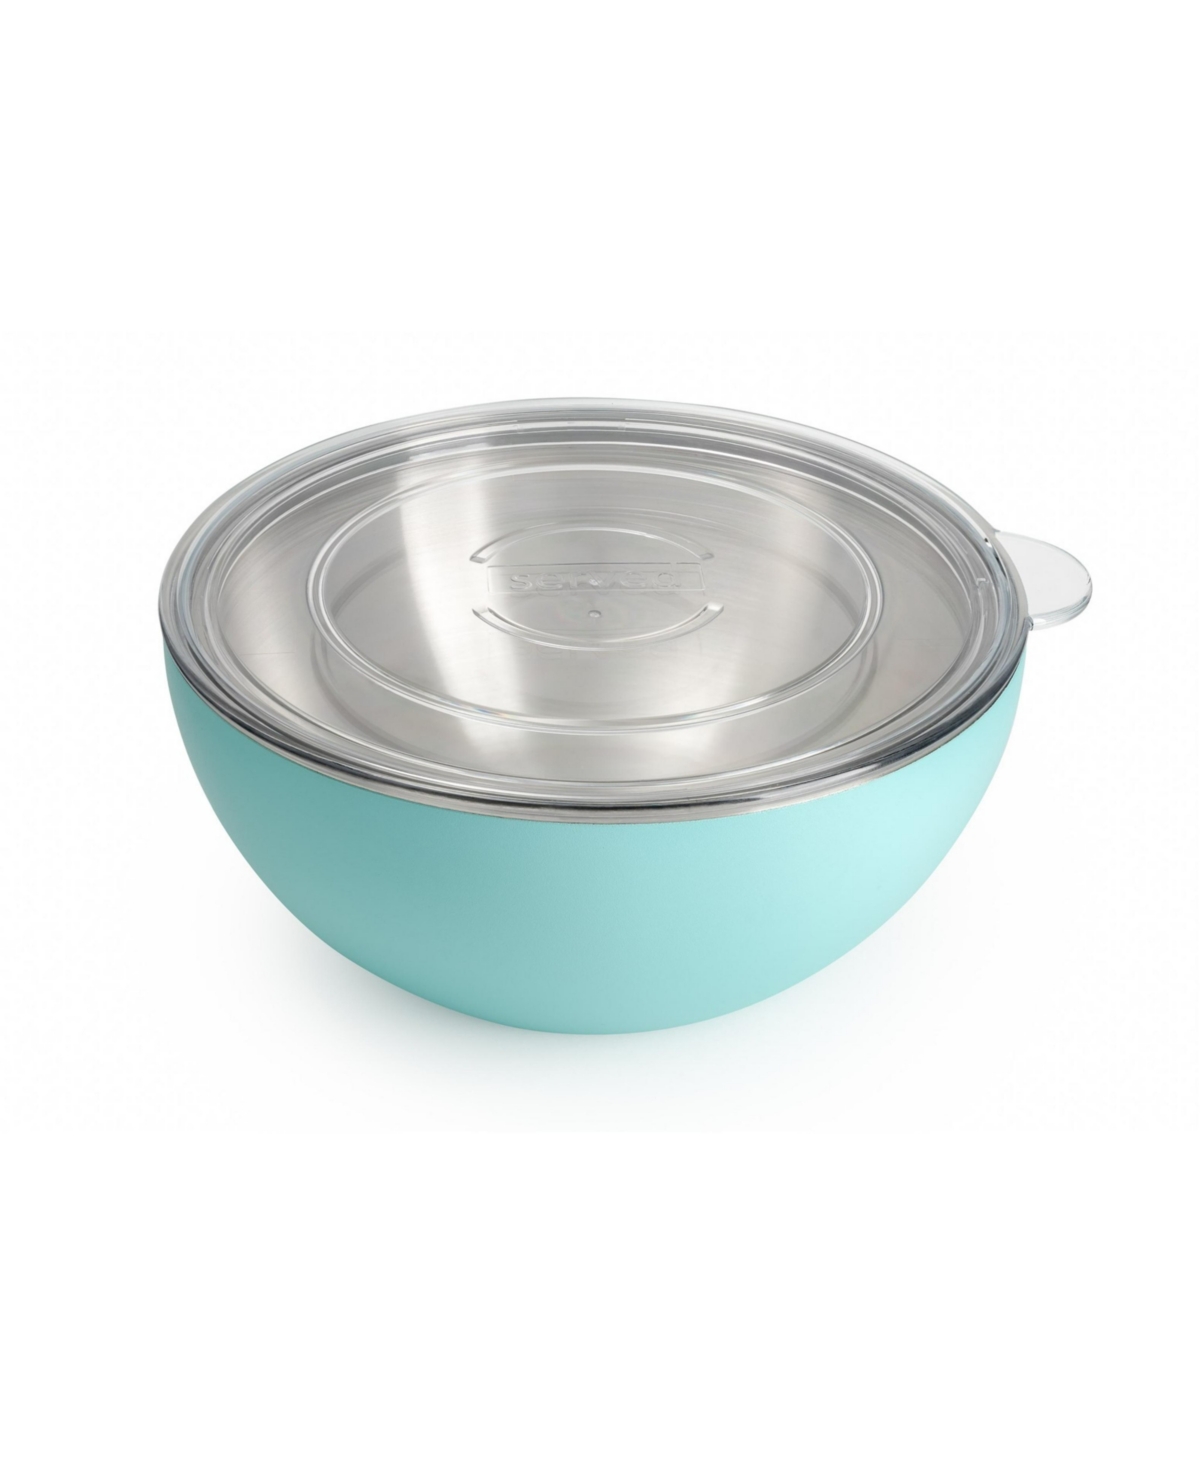 Served Vacuum-insulated Double-walled Copper-lined Stainless Steel Large Serving Bowl, 2.5 Quarts In Blue Lemonade